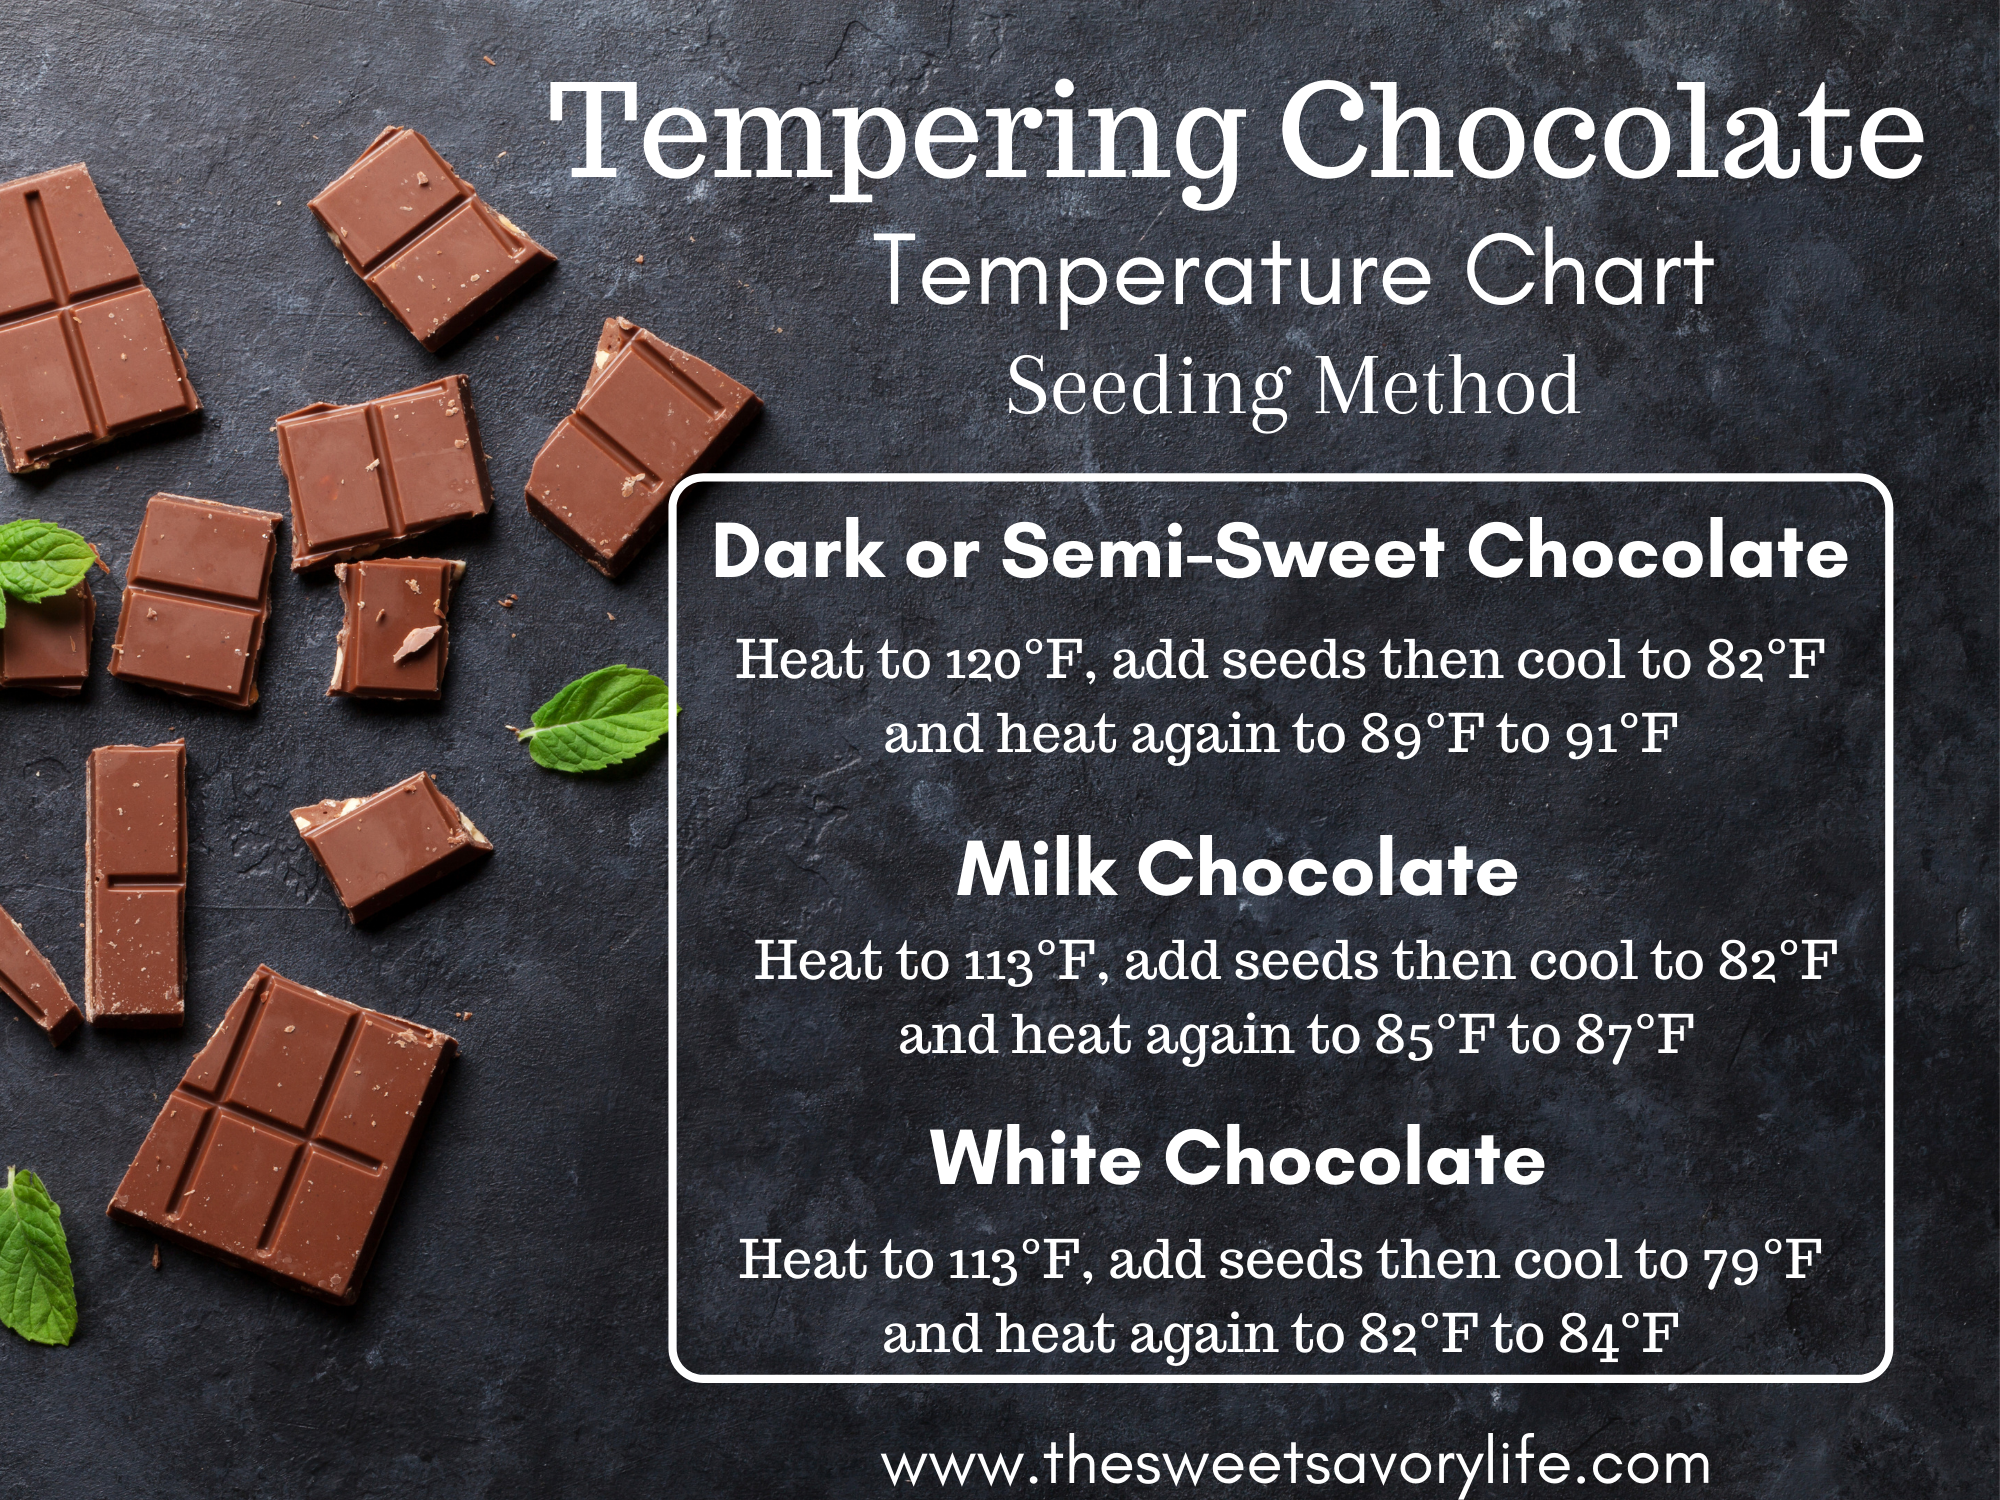 Tempering Chocolate The Easy Way (No Thermometer)  How to temper chocolate,  Chocolate slabs, Chocolate work